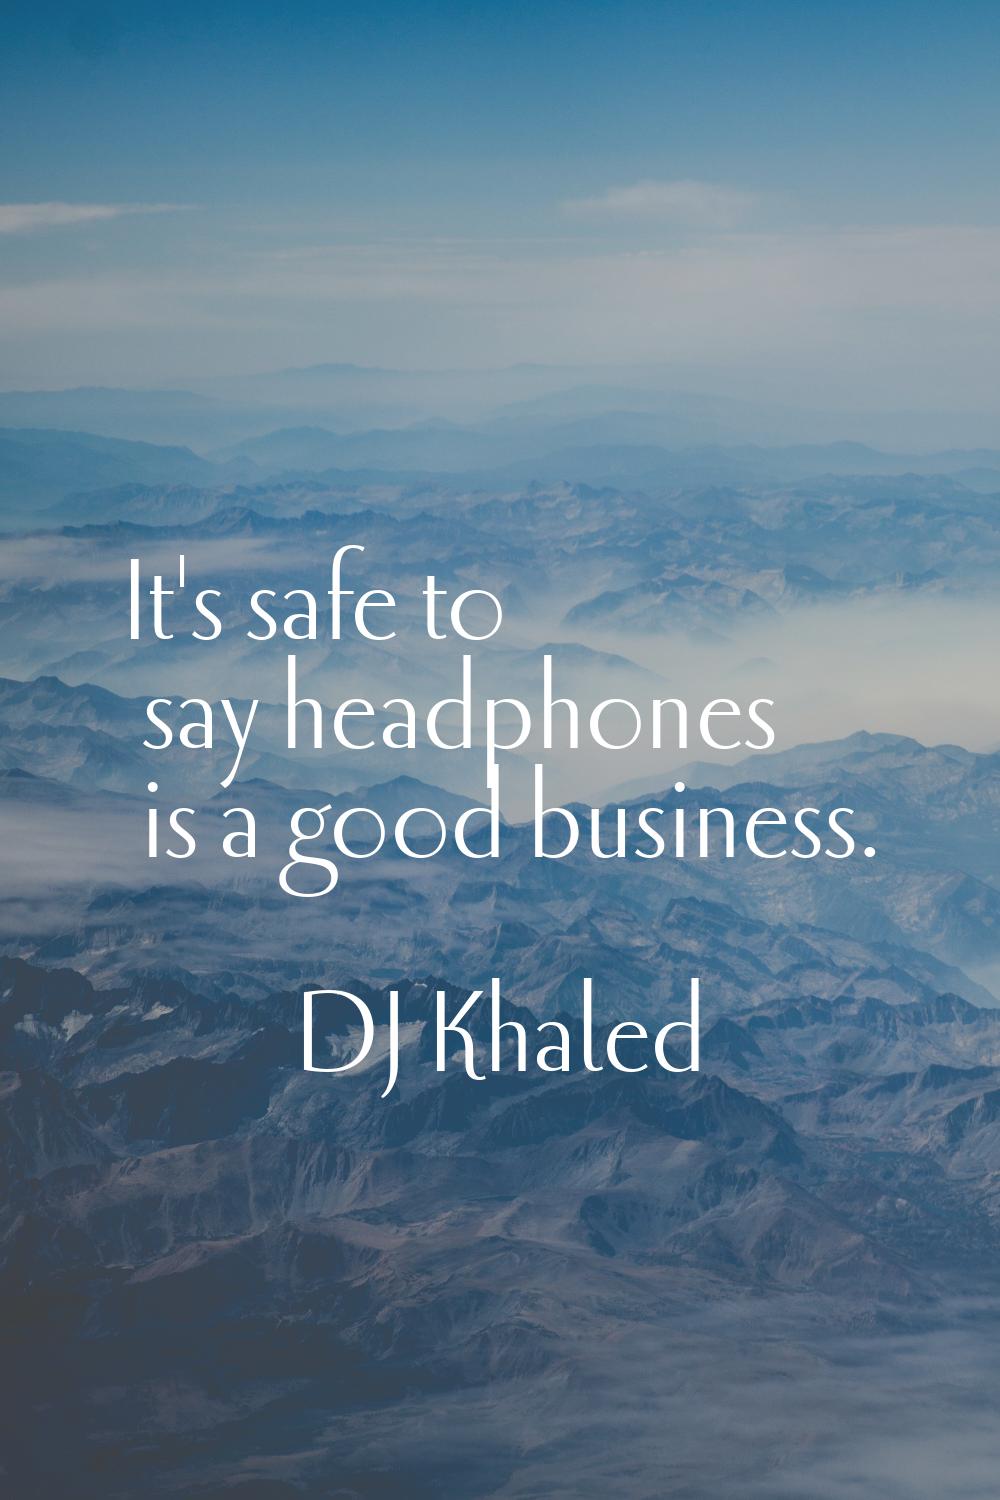 It's safe to say headphones is a good business.